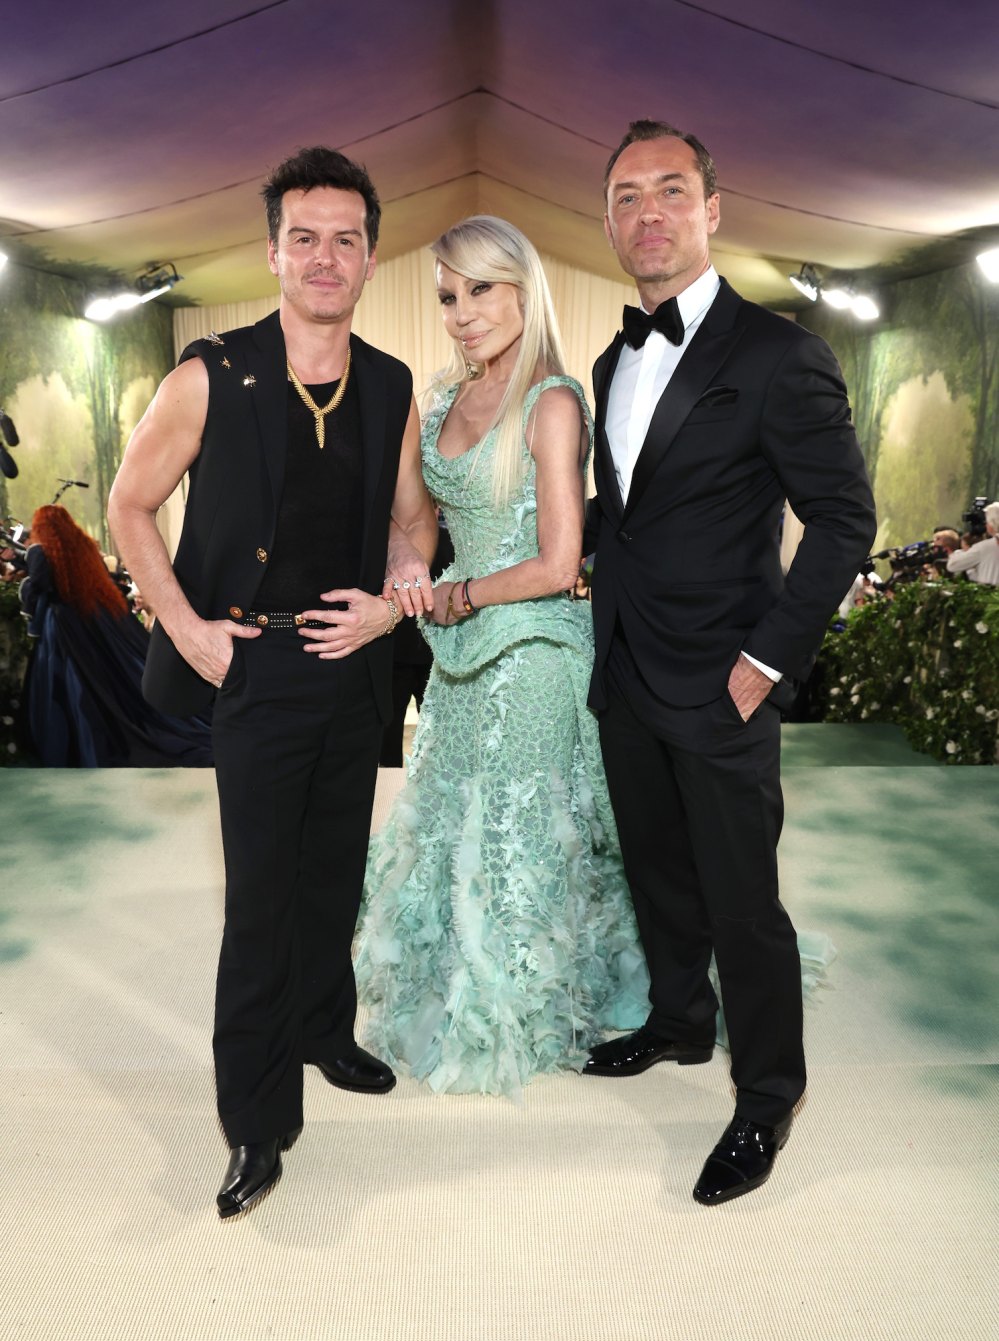 Andrew Scott and Jude Law Have a Talented Mr Ripley Meetup at Met Gala